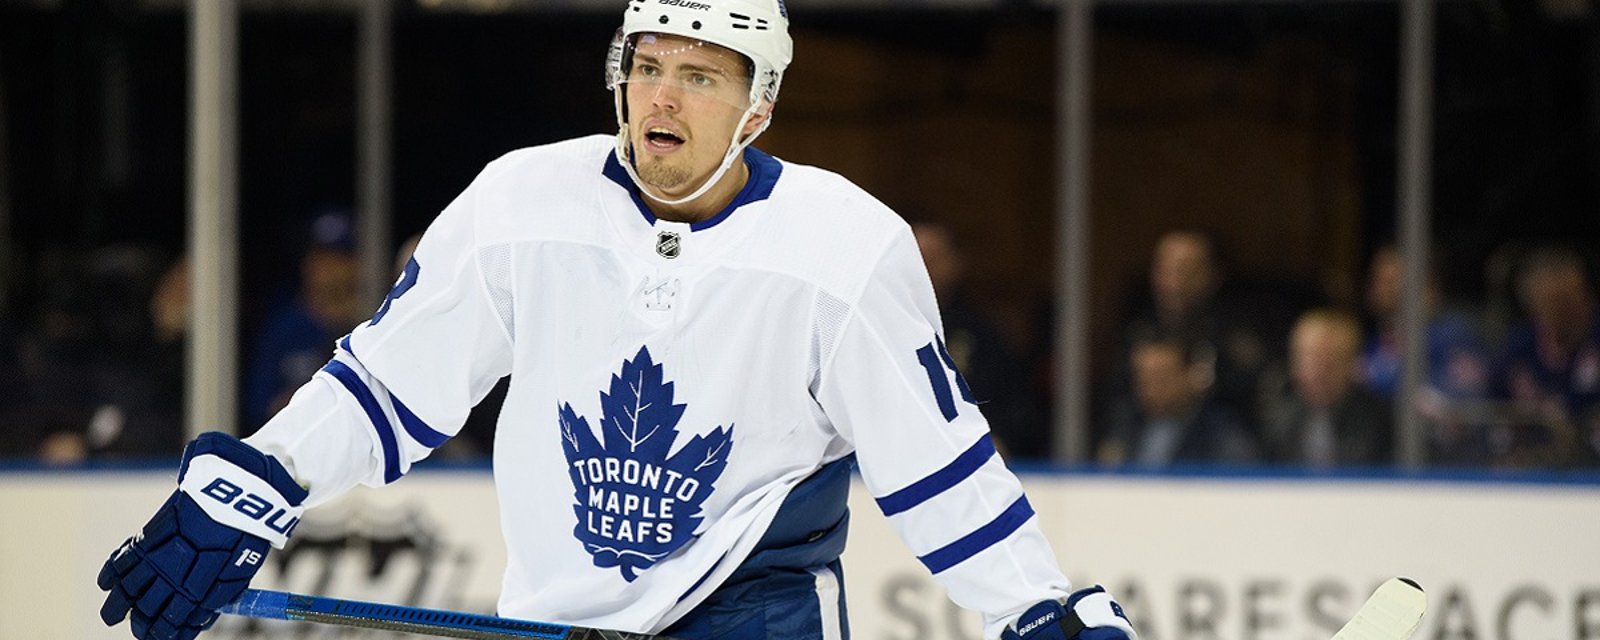 The Maple Leafs have traded Andreas Johnsson in a one for one deal.